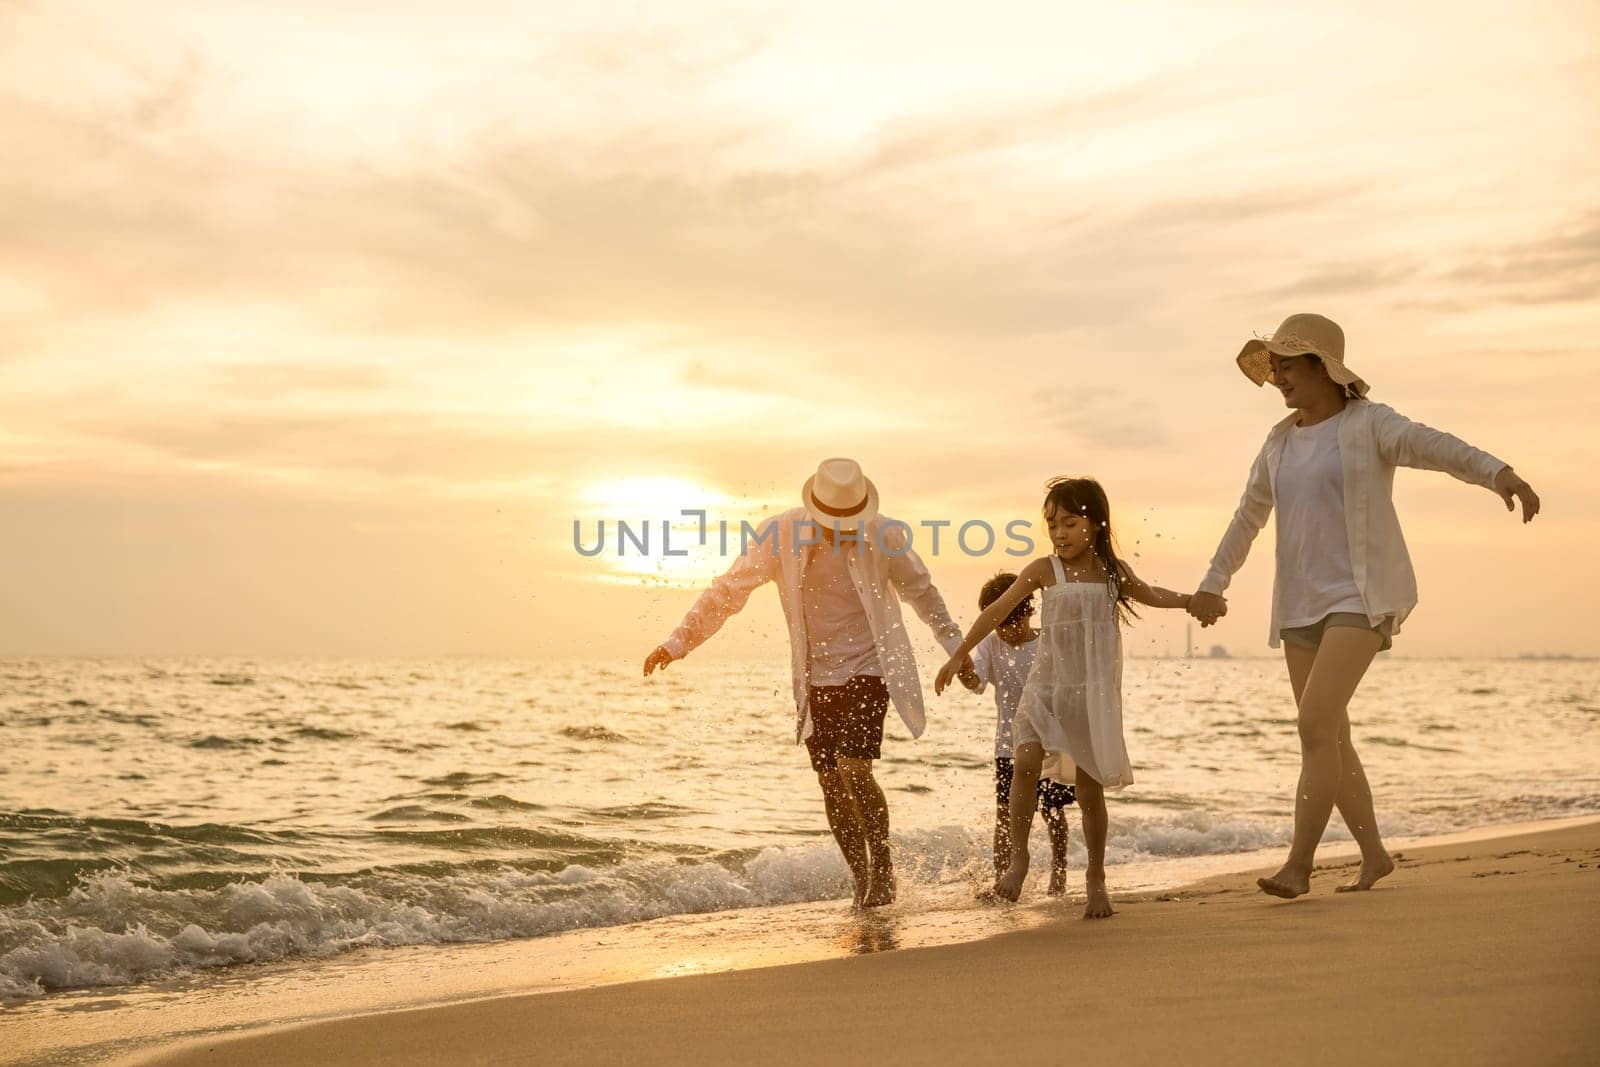 Happy family having fun running on a sandy beach at sunset time by Sorapop